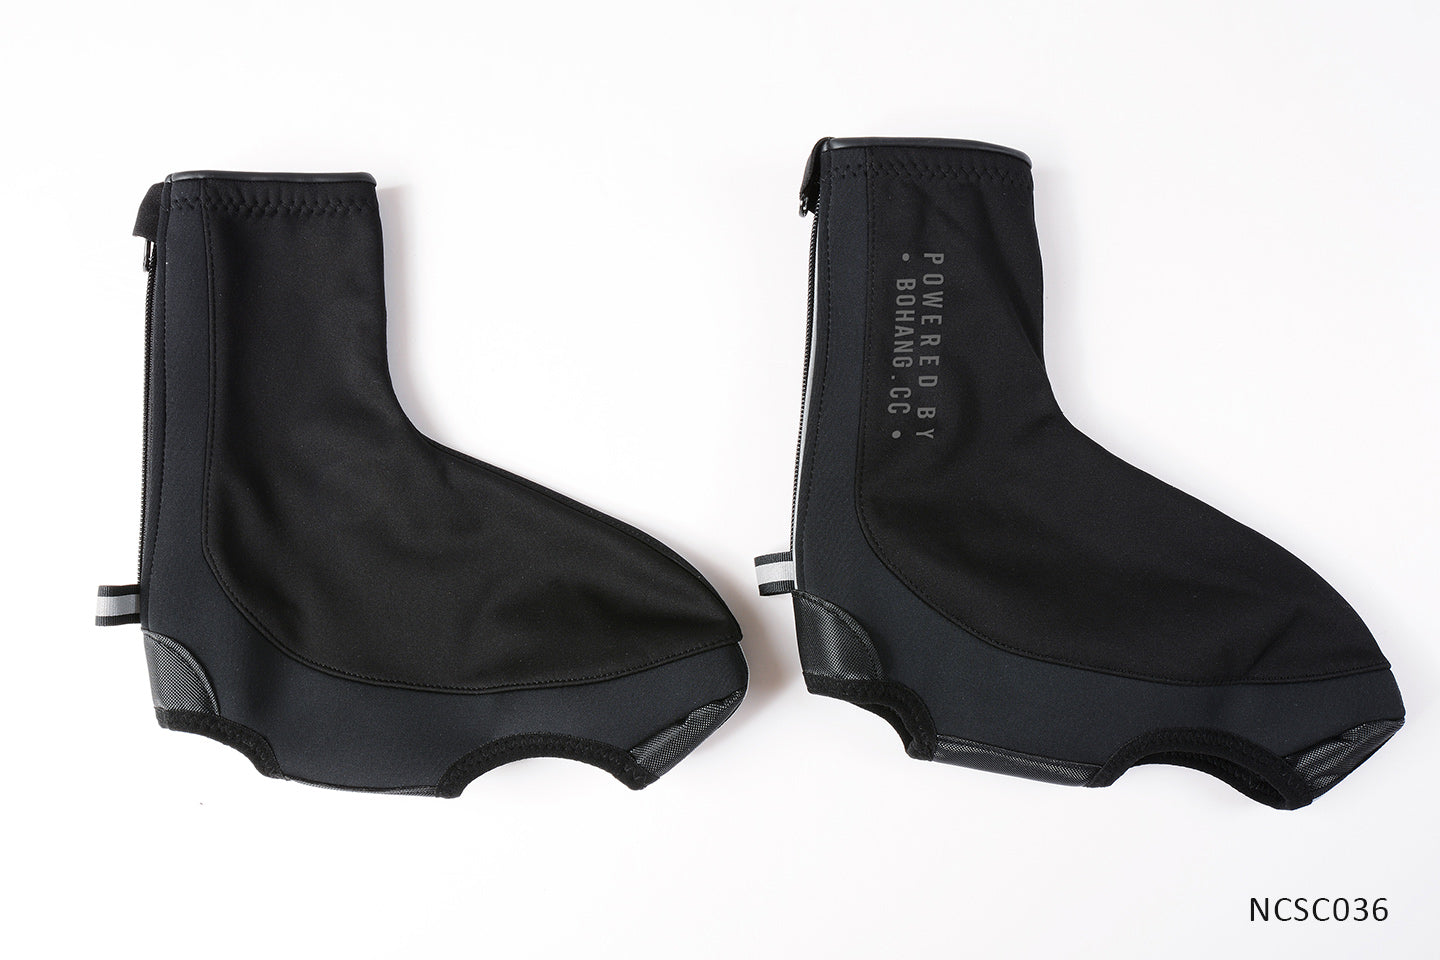 CYCLING WINTER OVERSHOES NCSC036